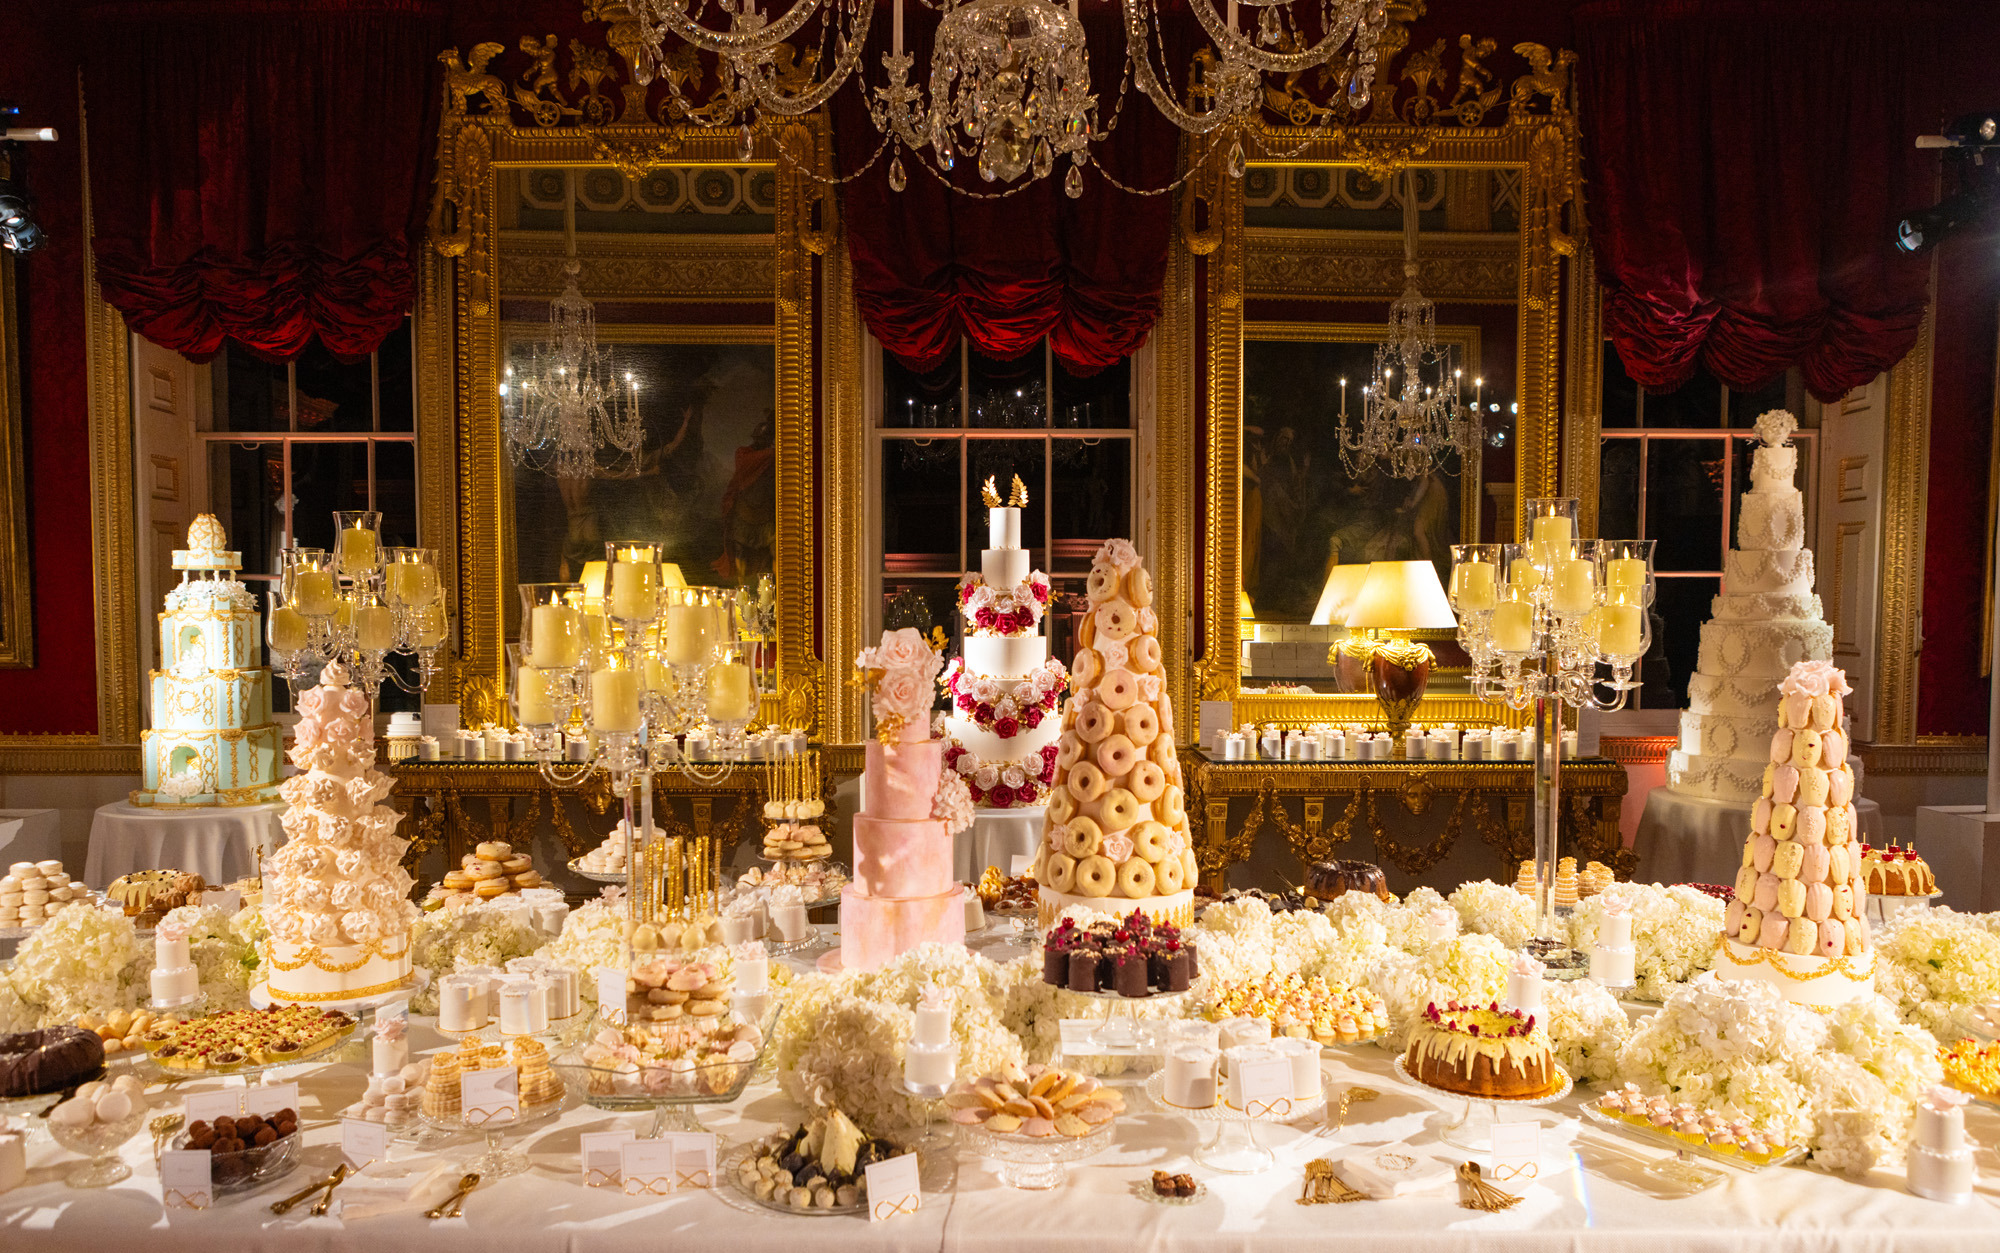 The Great Room at Spencer House with By Yevnig luxury wedding cakes and opulent indulgent dessert table